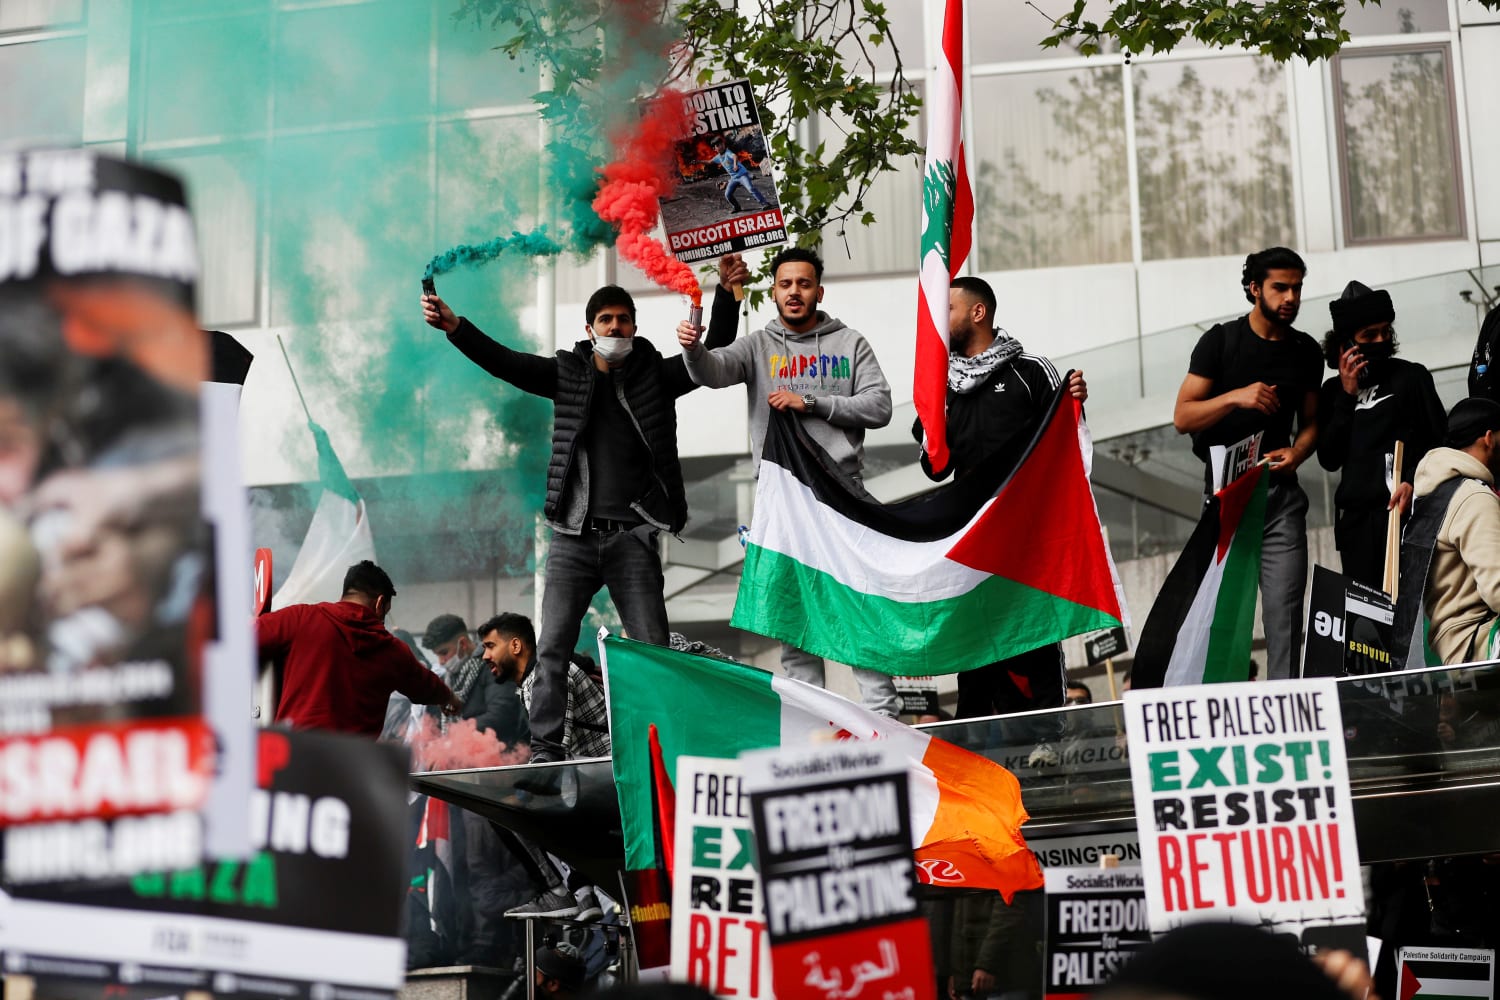 Download Thousands Take Part In Pro Palestinian Protests In Cities Across The World